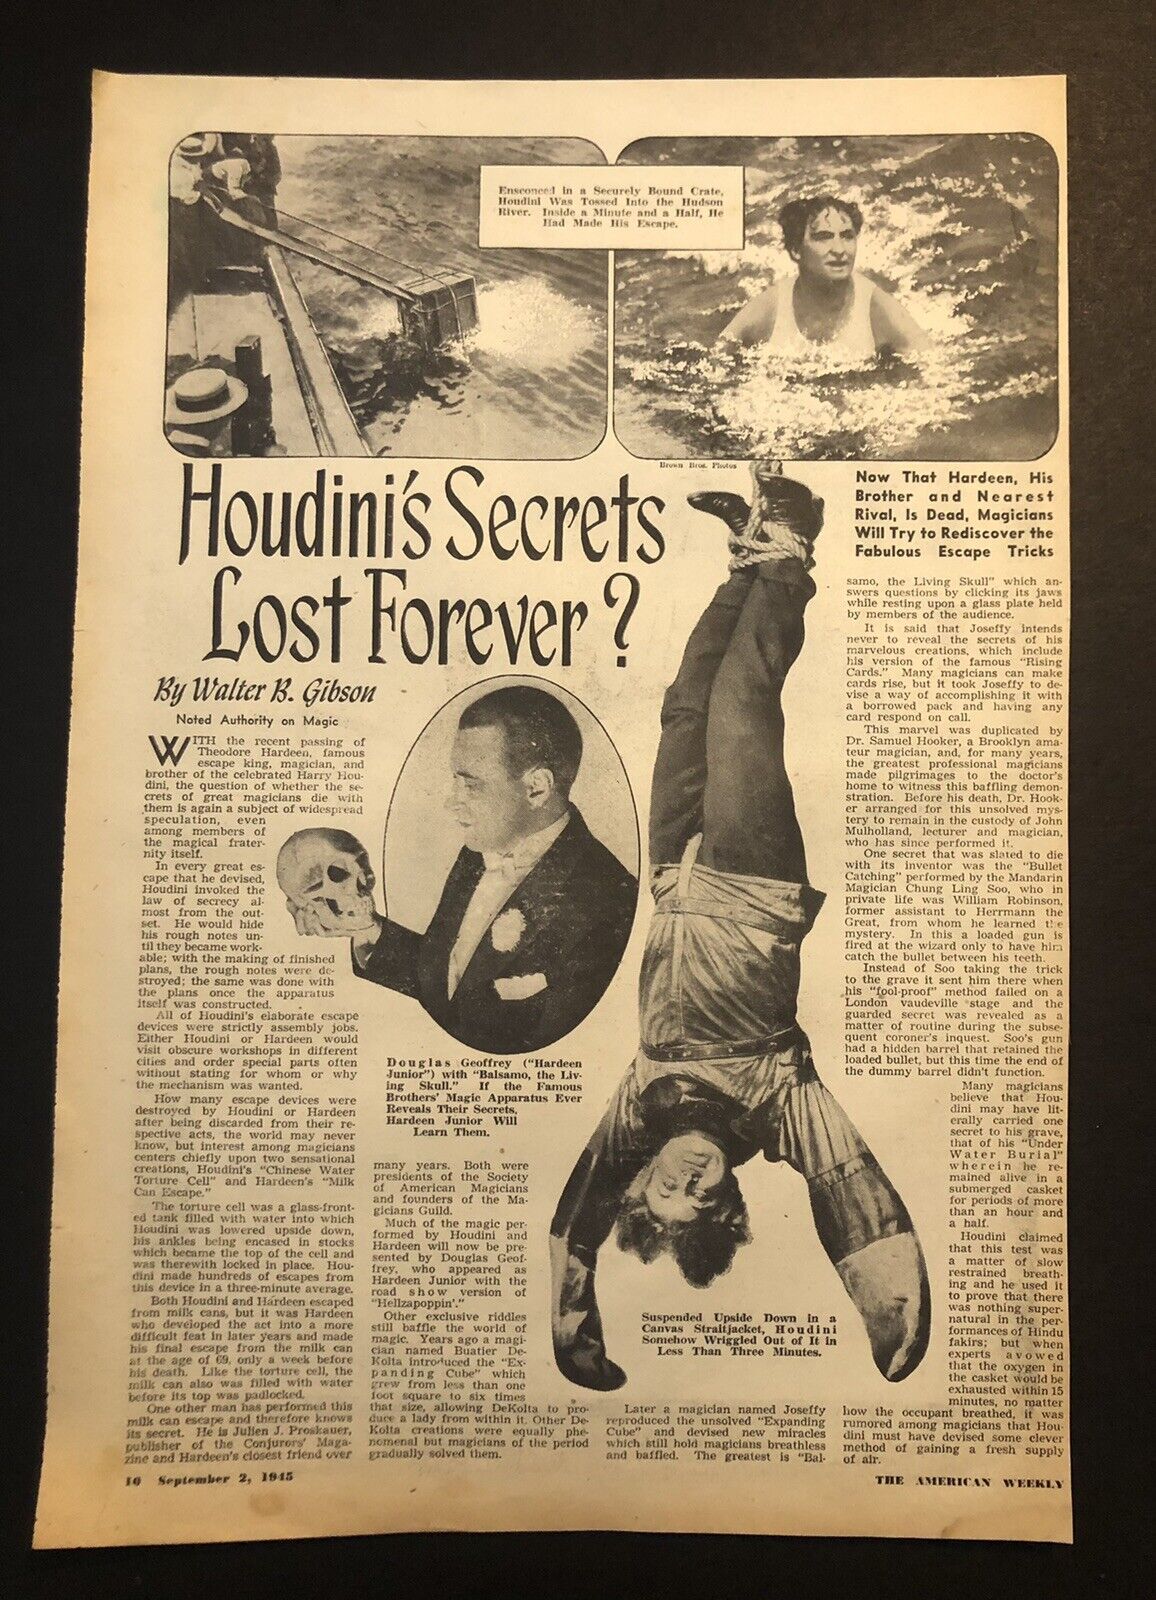 9-2-45 Harry Houdini & Brother Theodore Hardeen Death Magician Secrets Revealed?